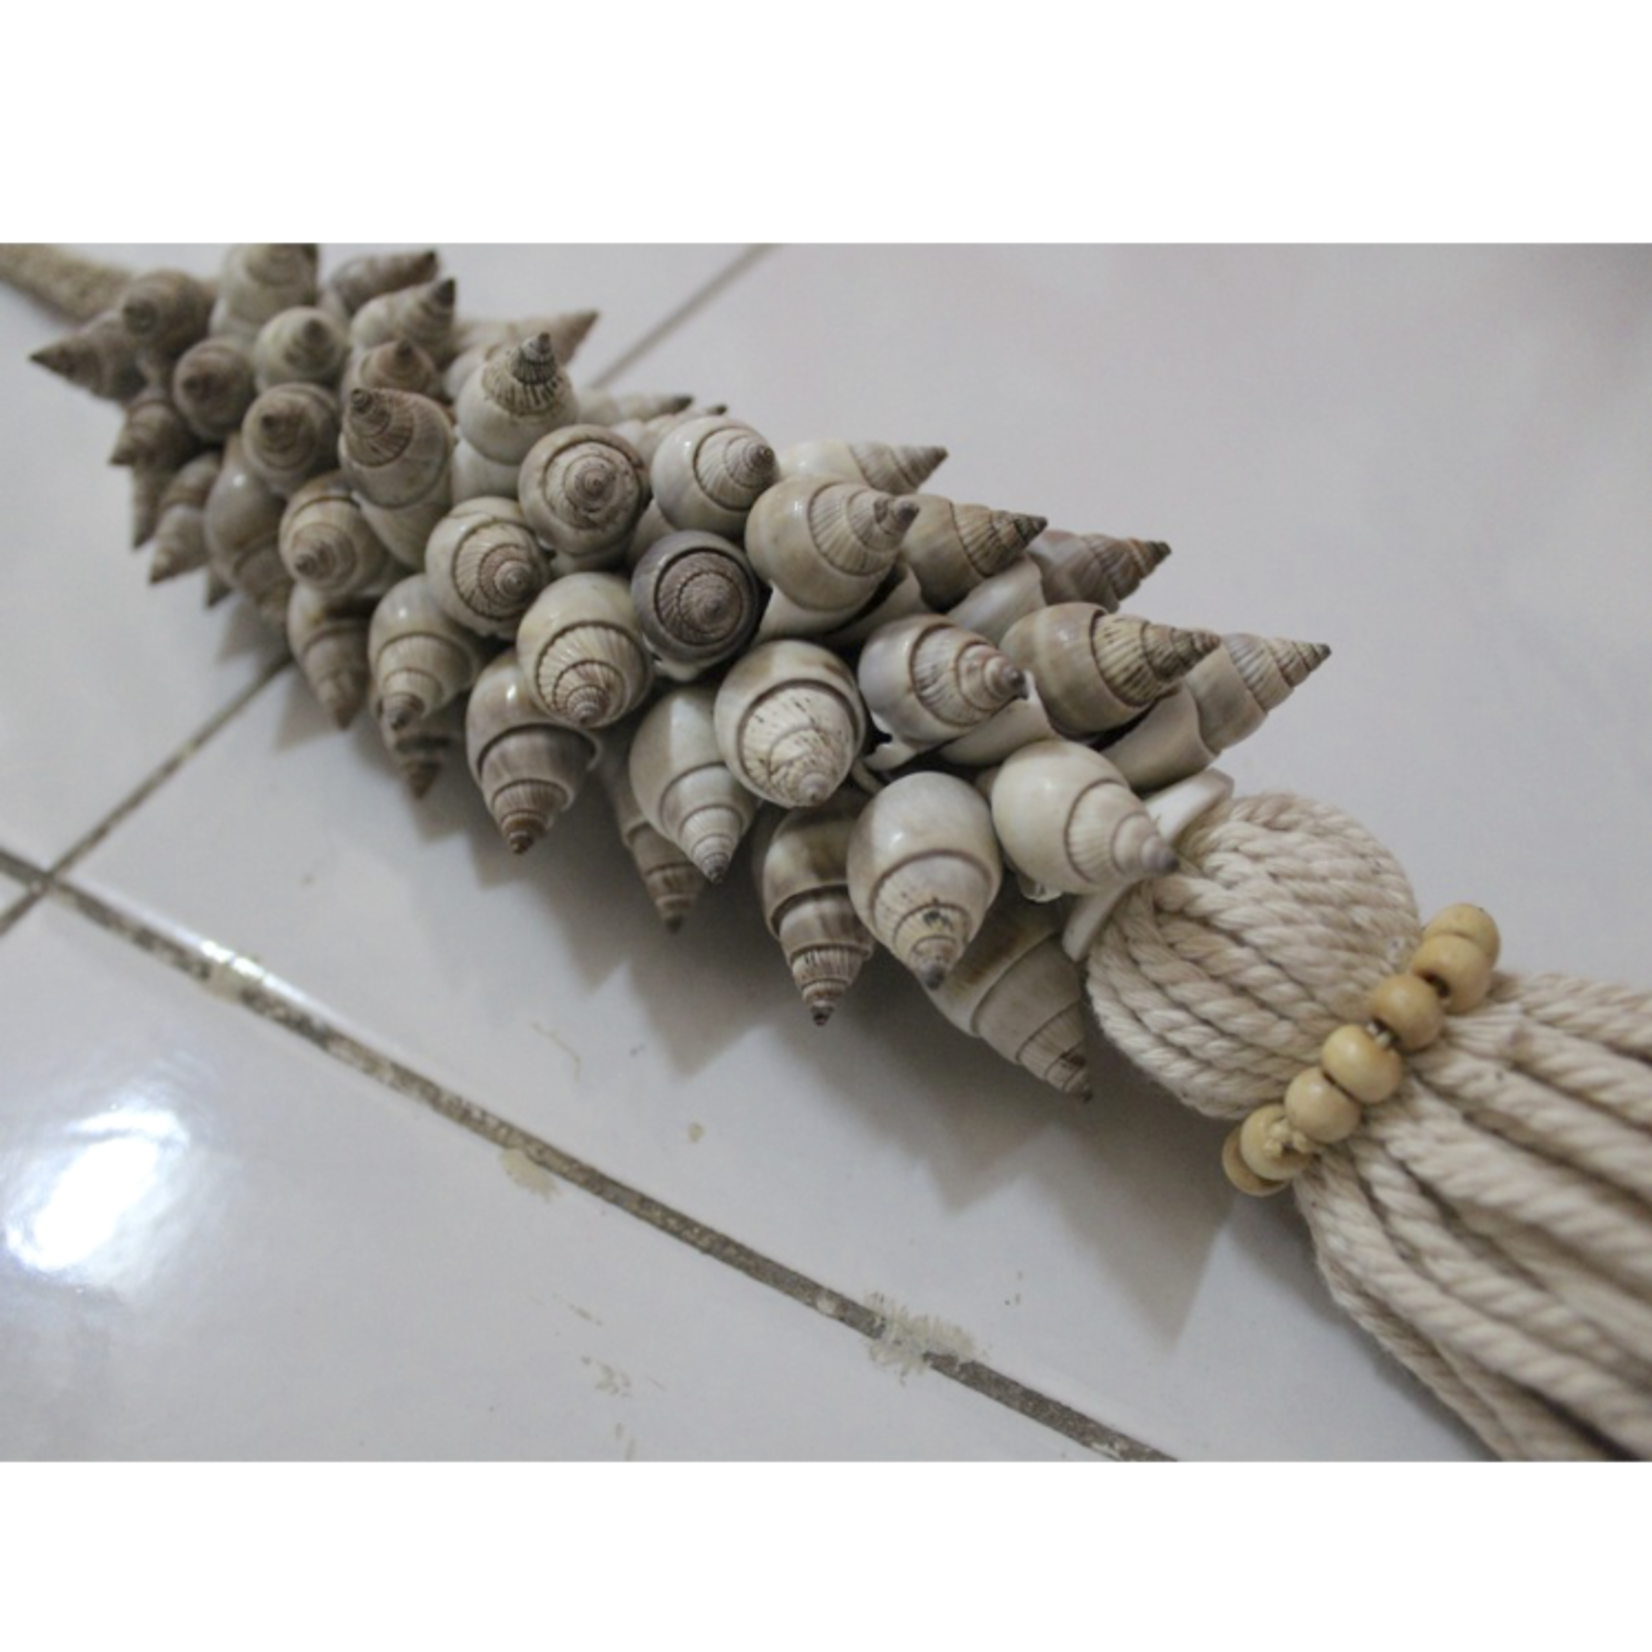 Outside The Box 29" Handcrafted Natural Cypraea Annulus Shell Tassel